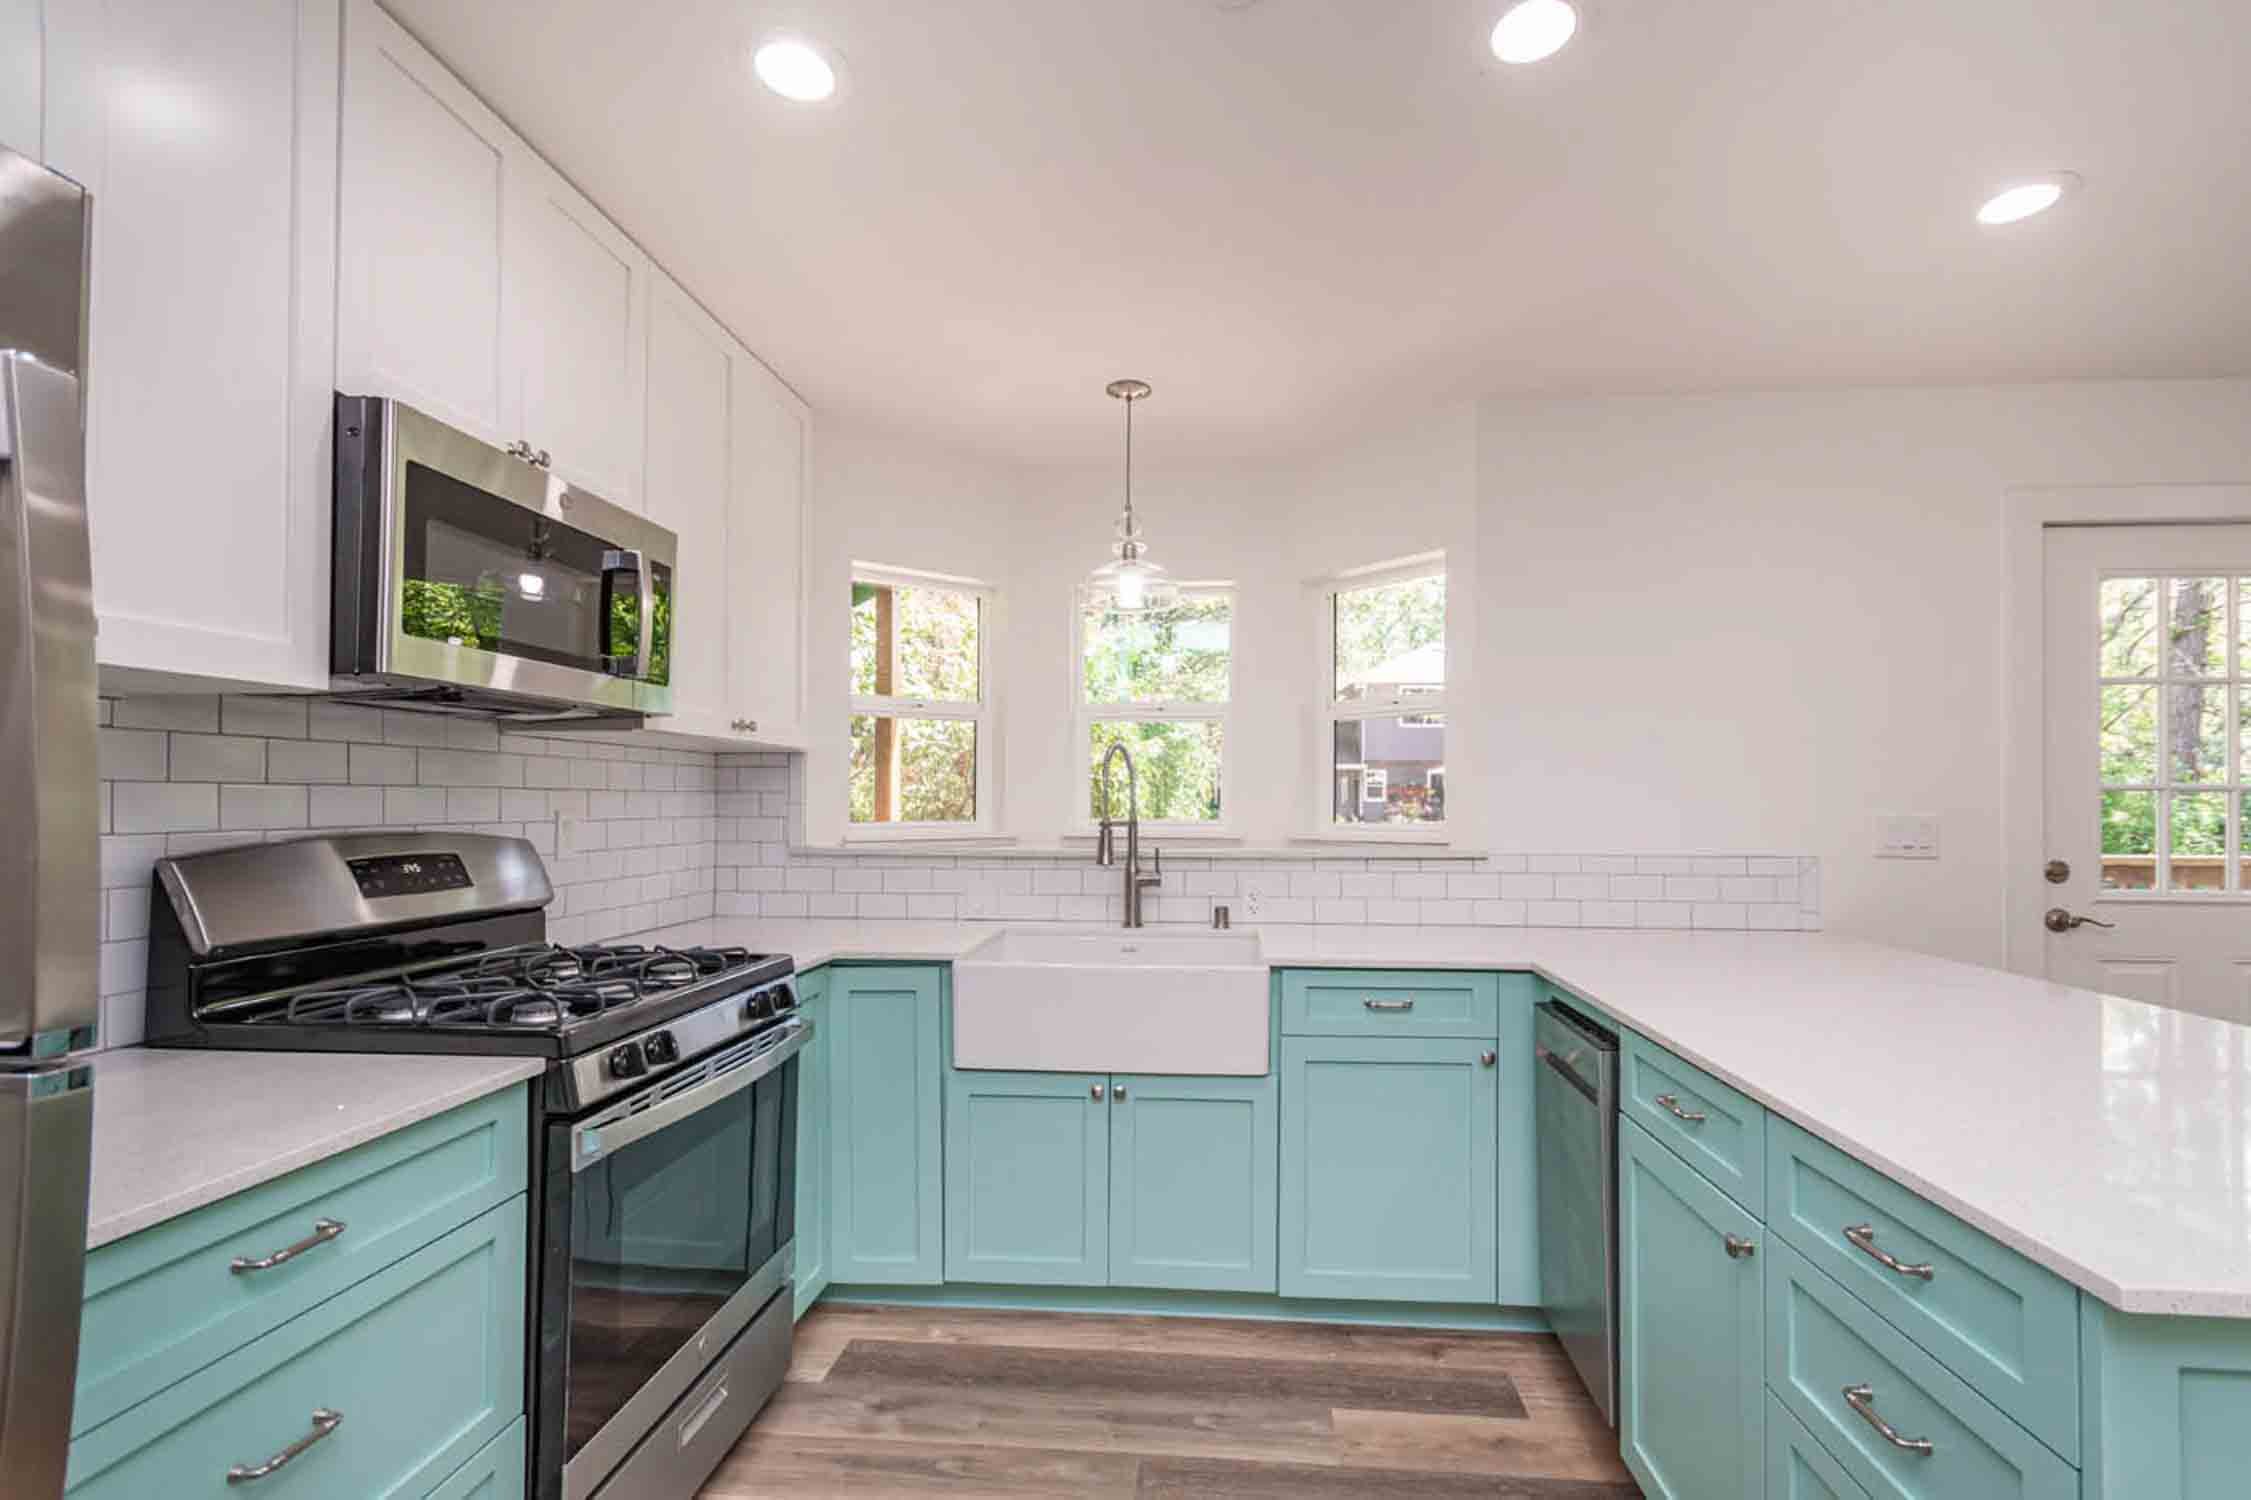 San Antonio tiny house companies and their project of a mint green kitchen in a home.